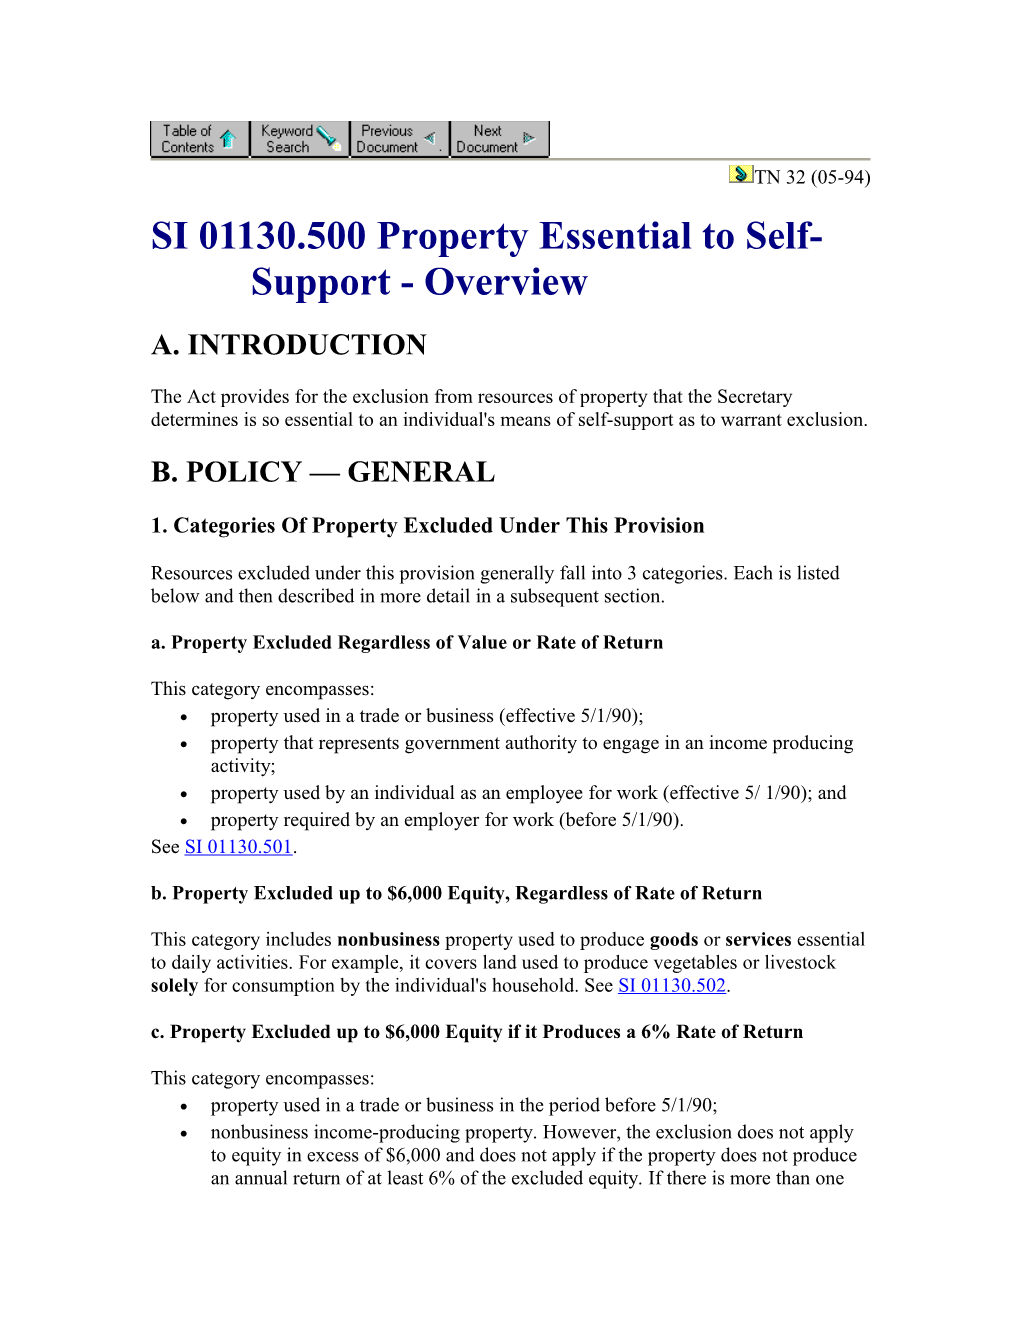 SI 01130.500 Property Essential to Self-Support - Overview